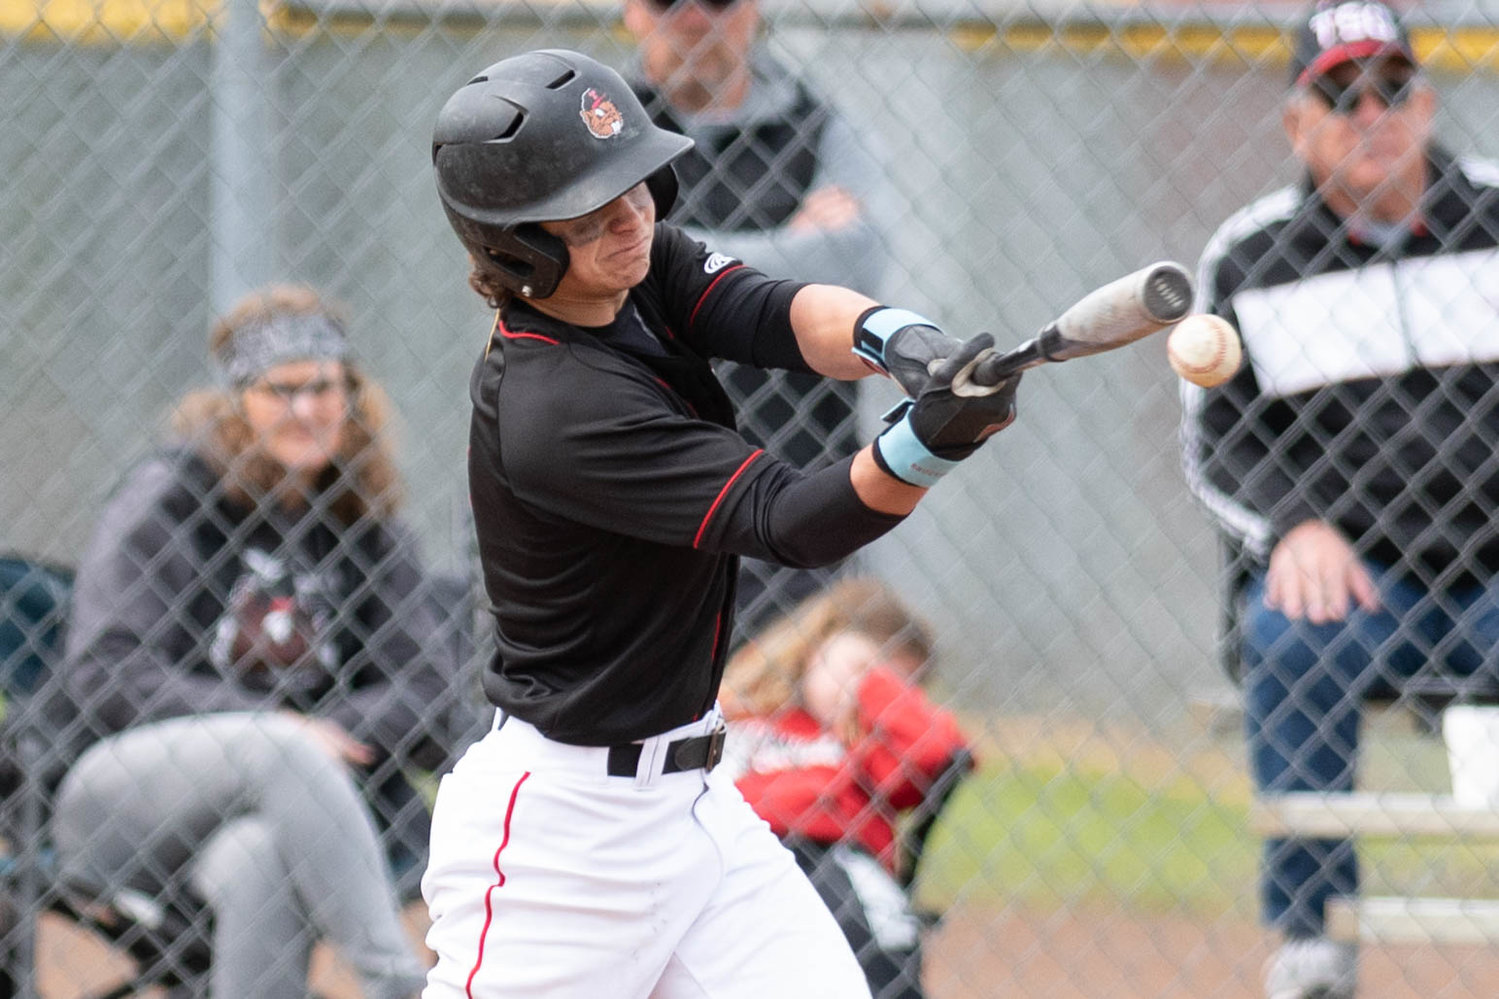 Tenino's Easton Snider makes contact with a pitch against Eatonville in the 1A District 4 playoffs at Castle Rock May 13.